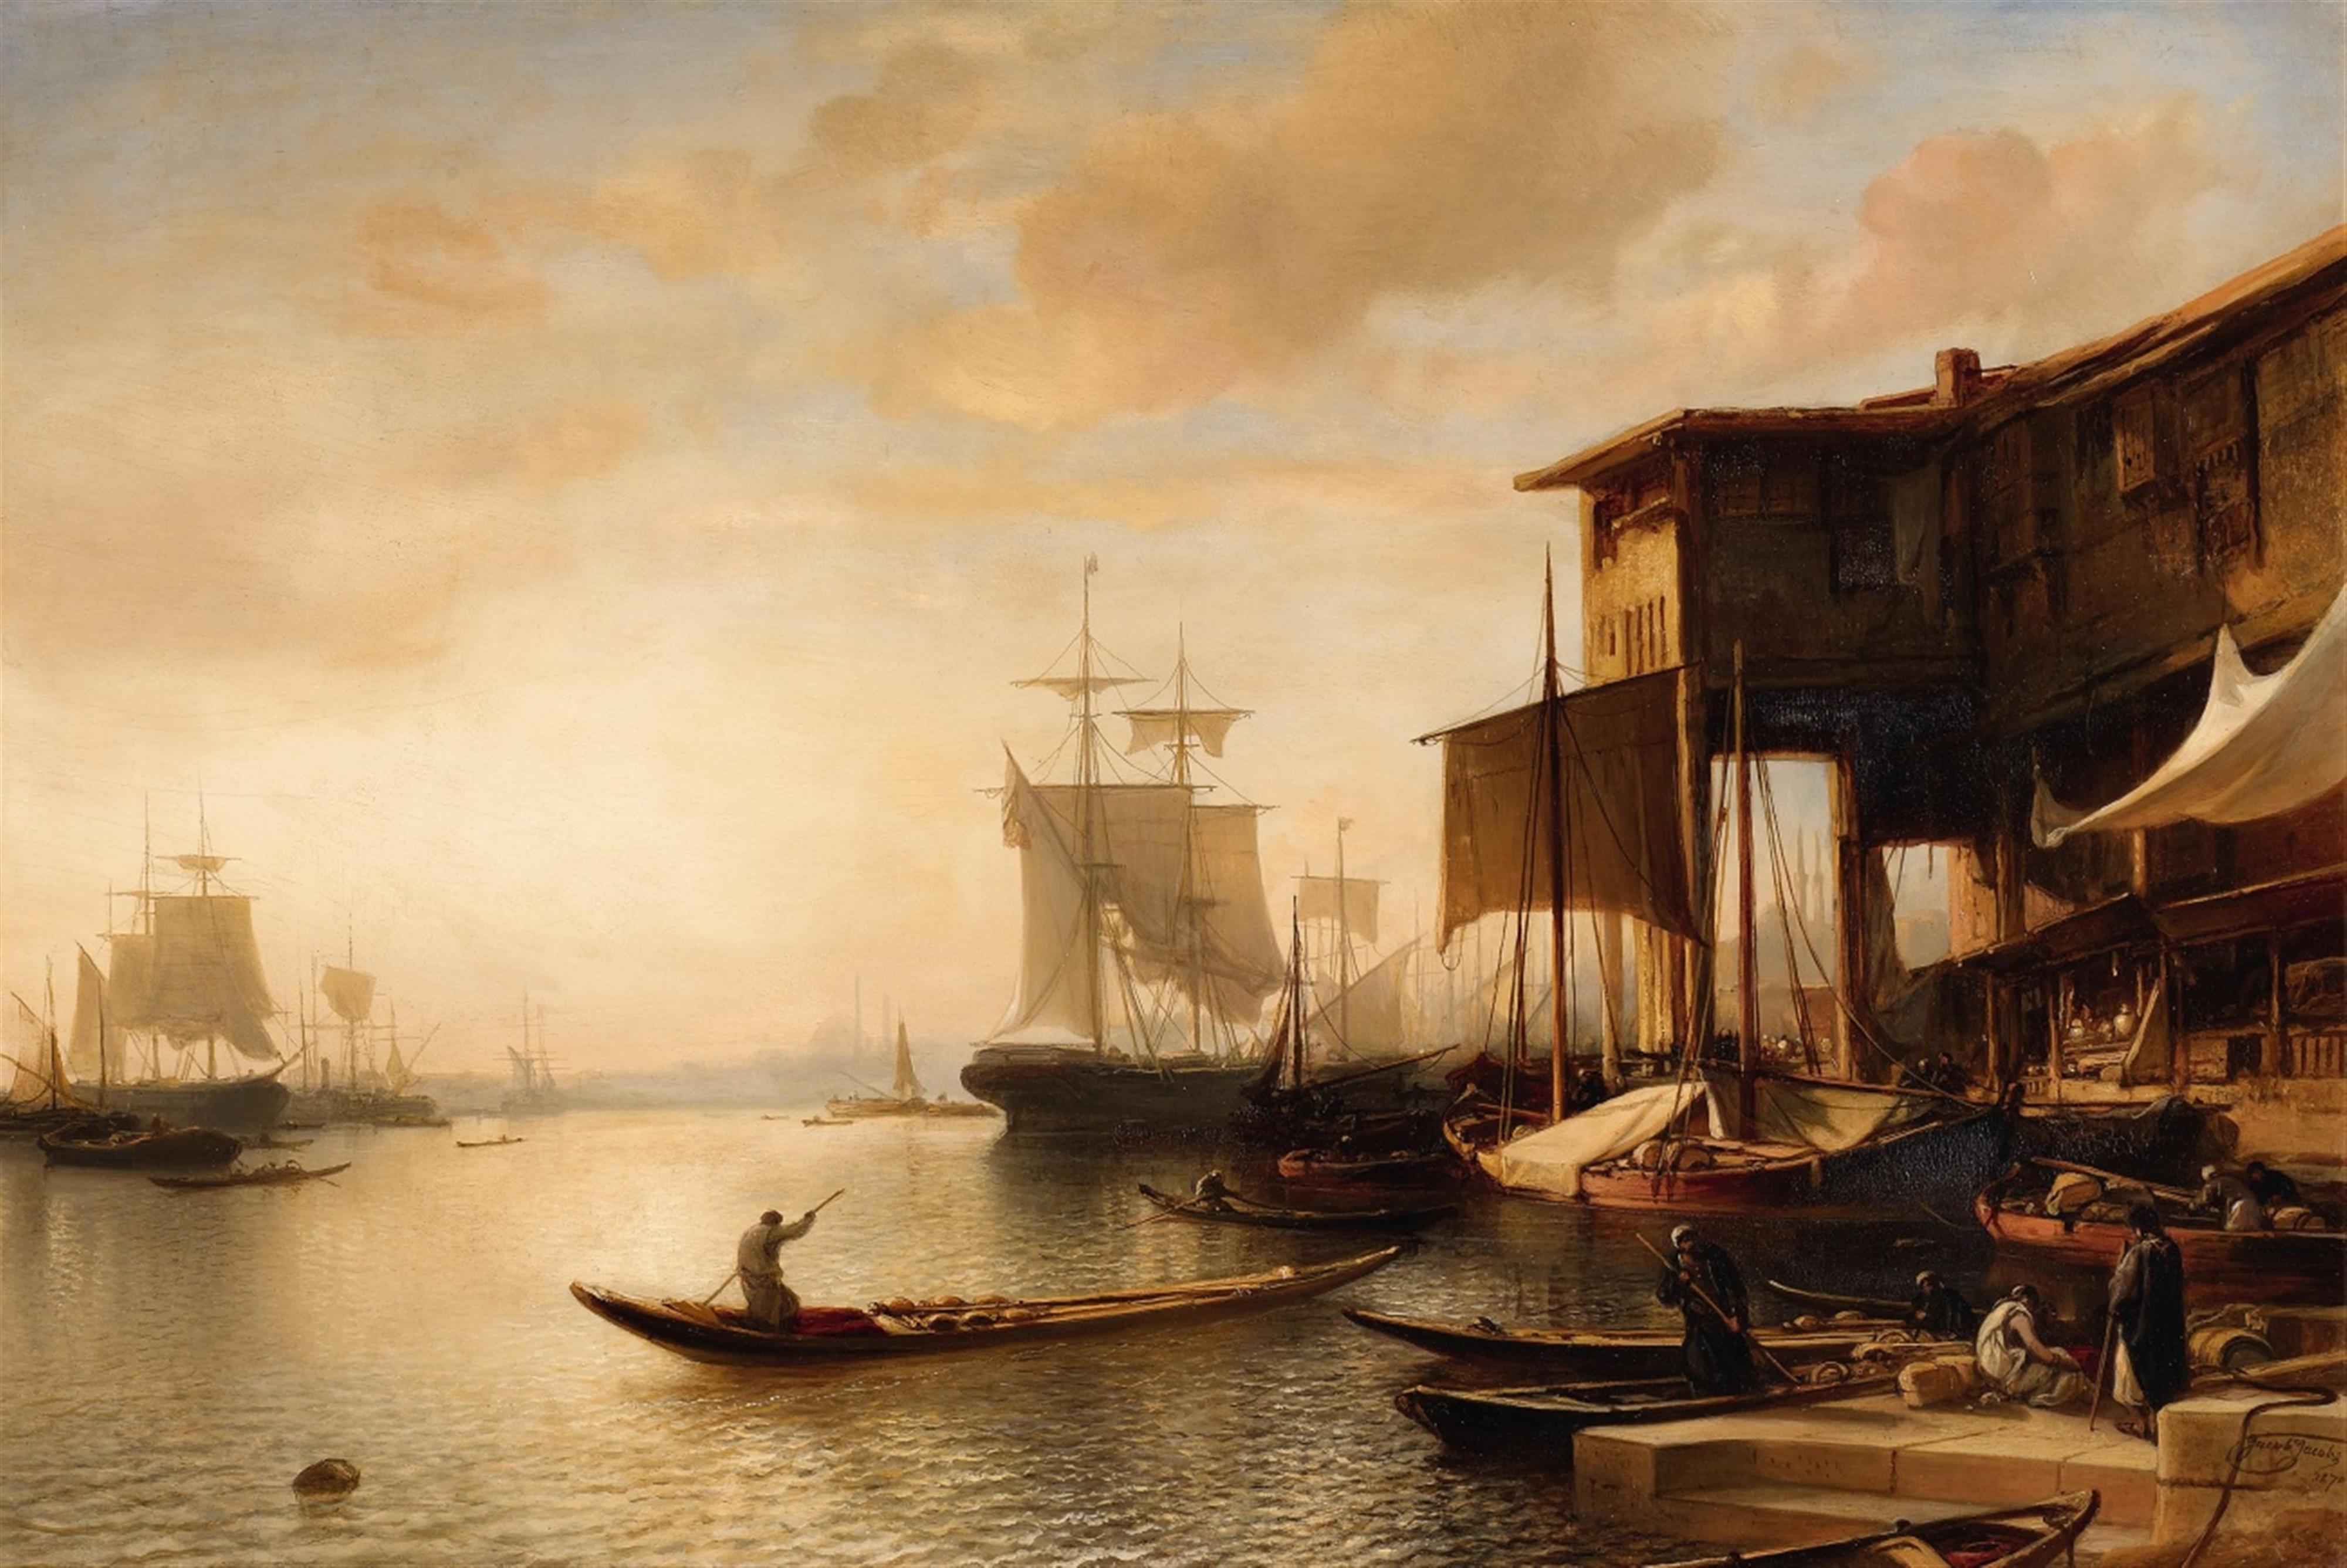 Jacob Jacobs - A Busy Market Scene at Istanbul Harbour - image-1